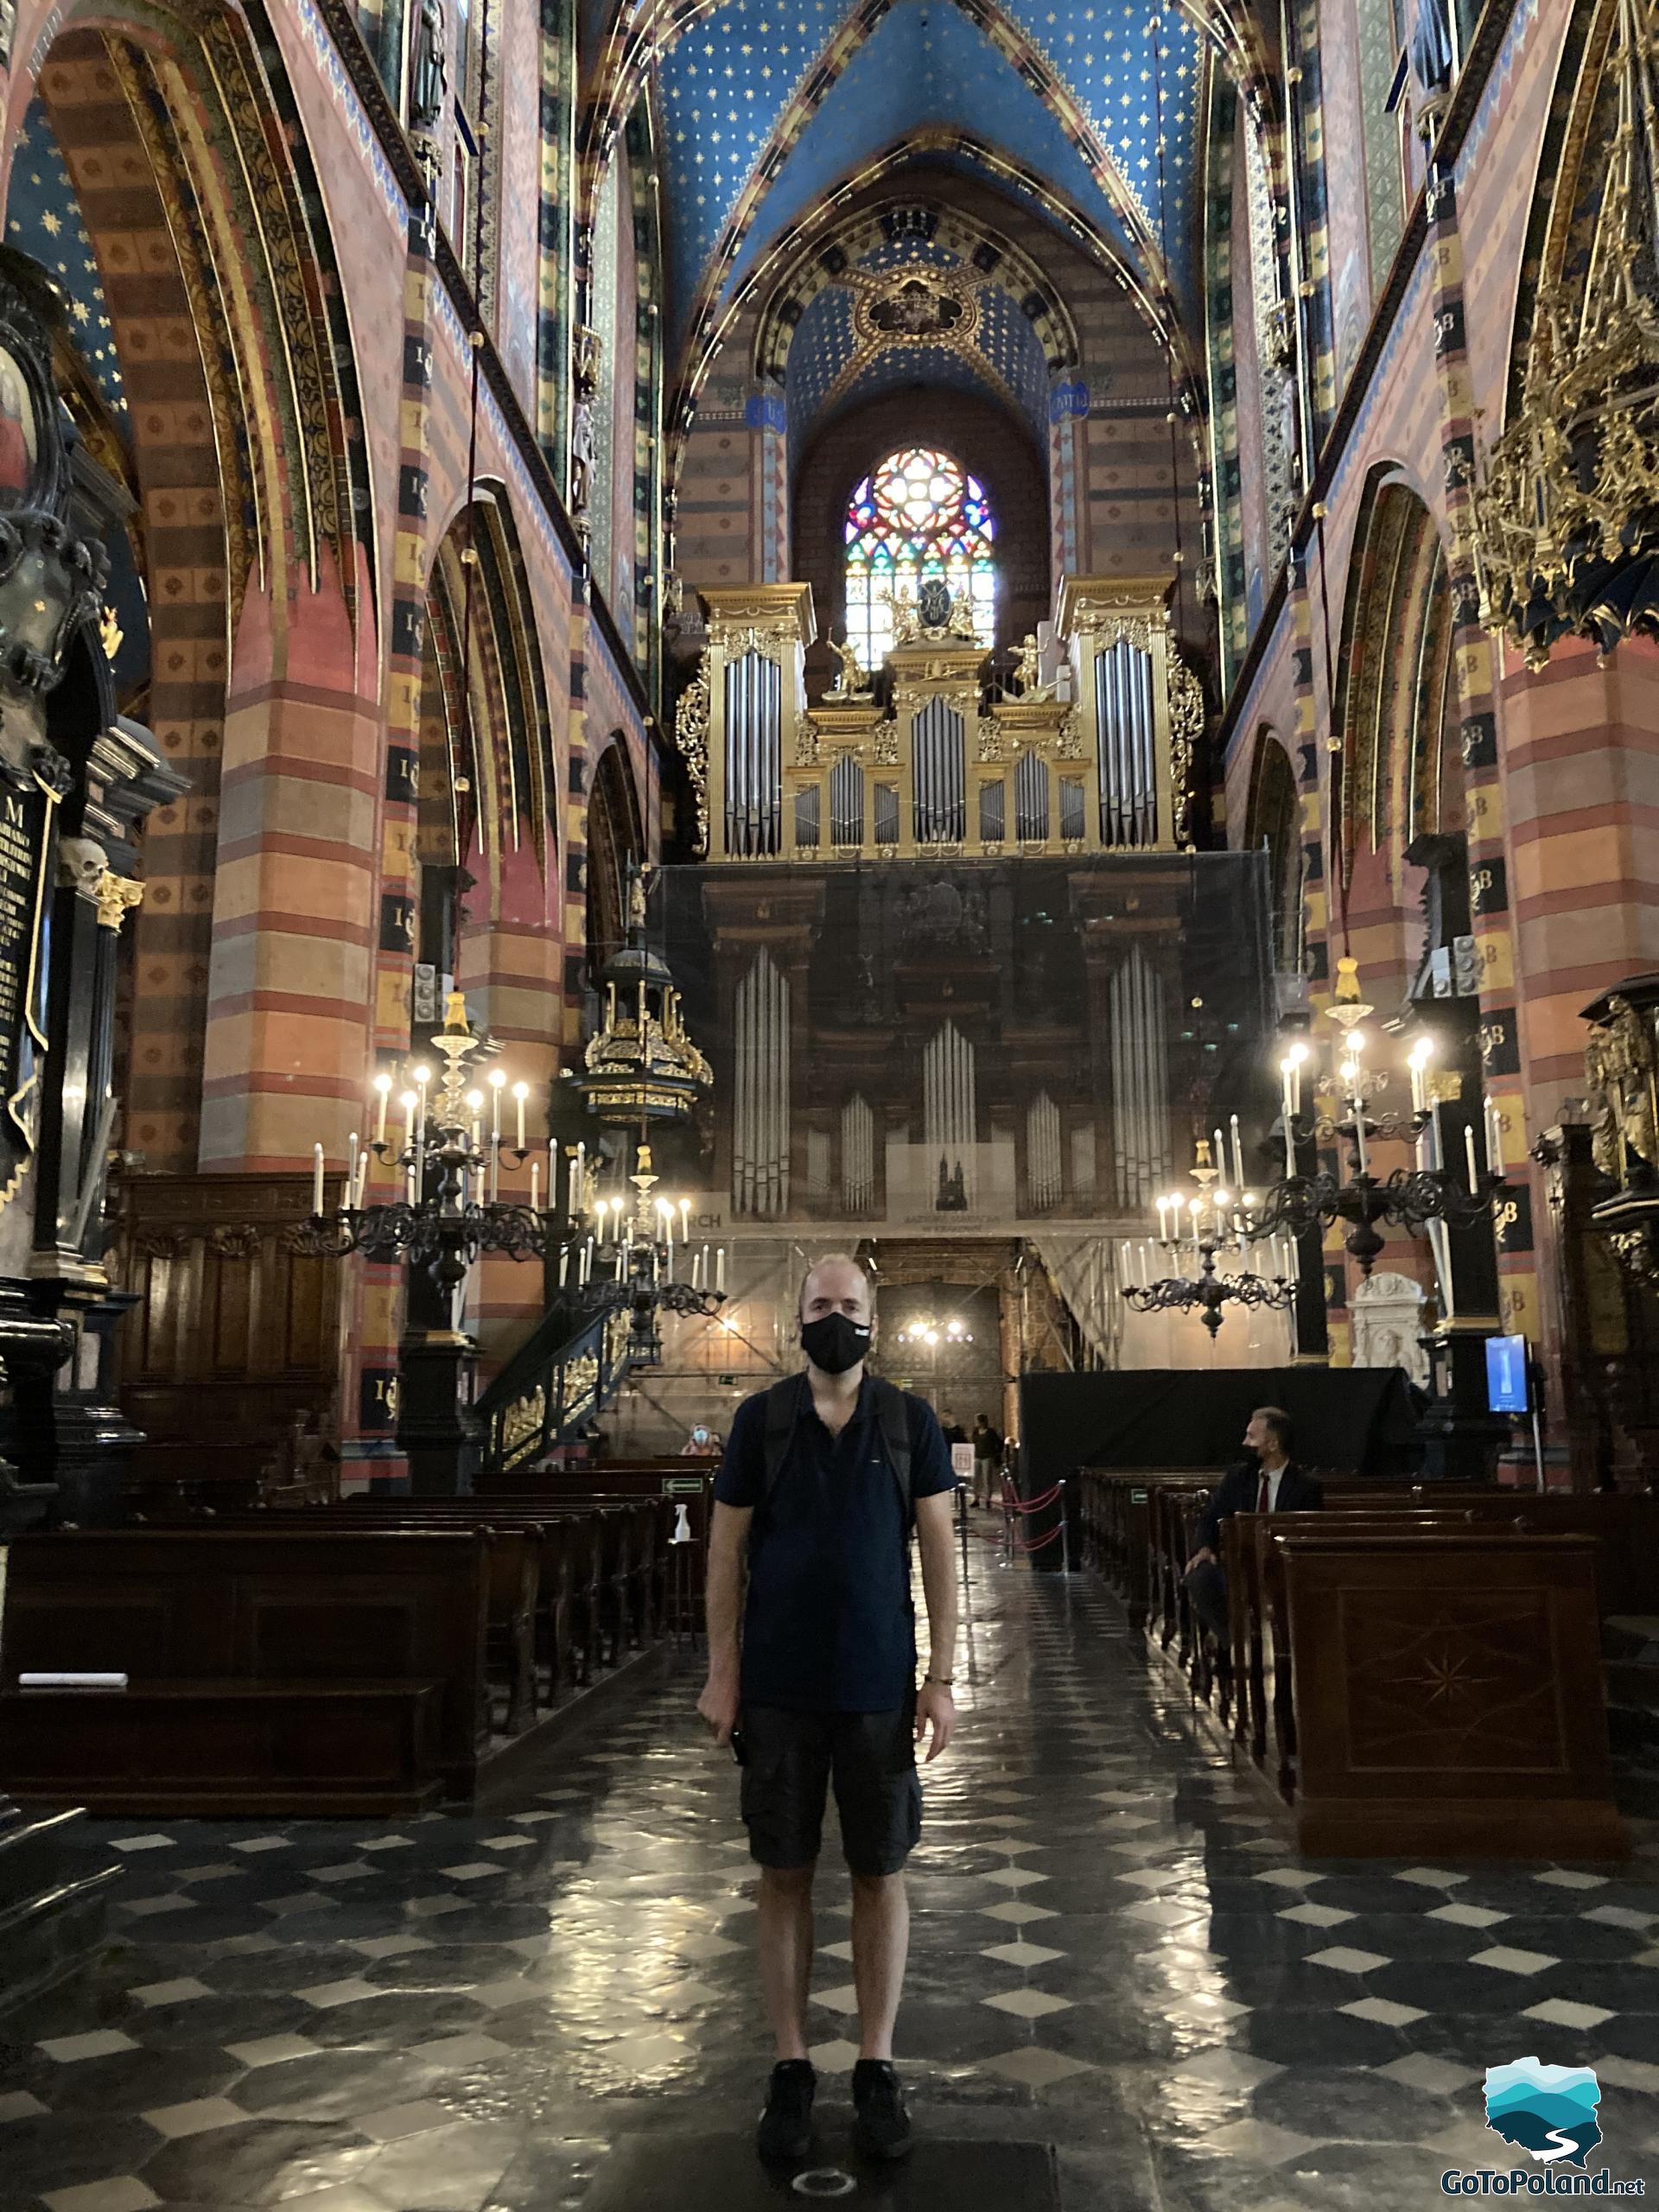 a man is standing inside the church, behind him there is the organ and rows of pews